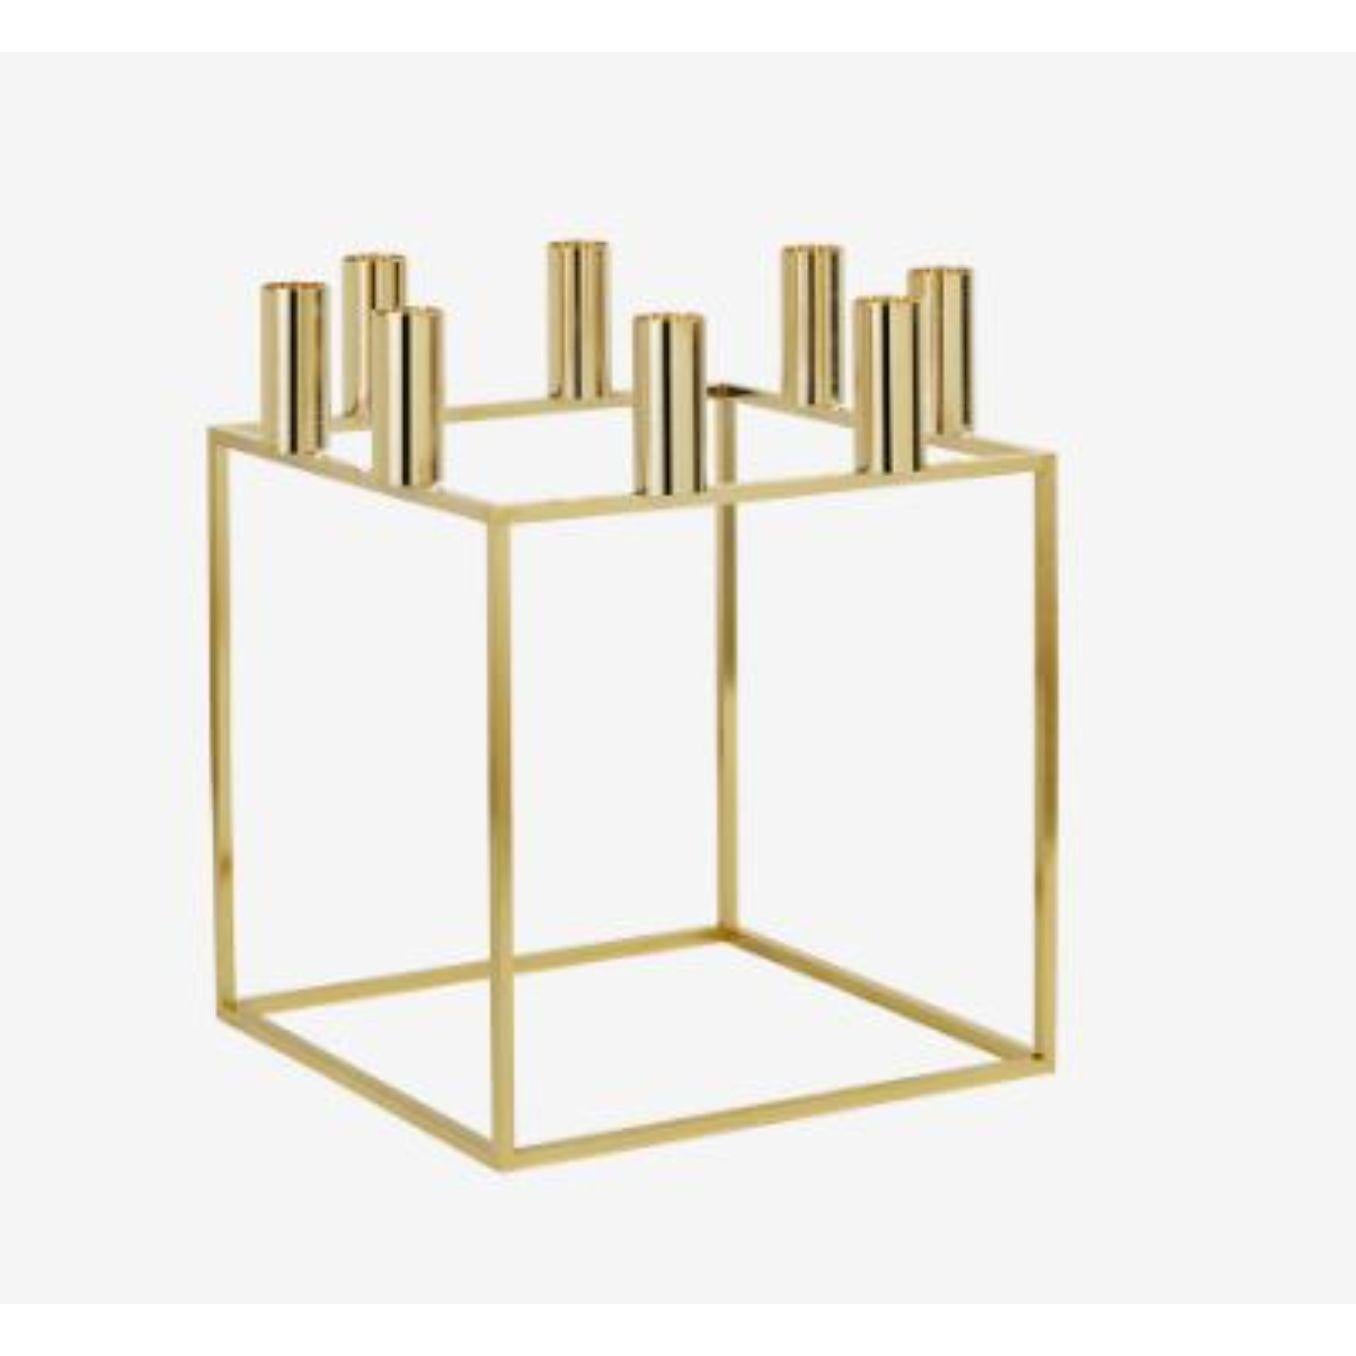 Gold plated kubus 8 candle holder by Lassen
Dimensions: D 23 x W 23 x H 29 cm 
Materials: Metal 
Also available in different dimensions. 
Weight: 1.50 Kg

With a sharp sense of contemporary Functionalist style, Mogens Lassen designed the